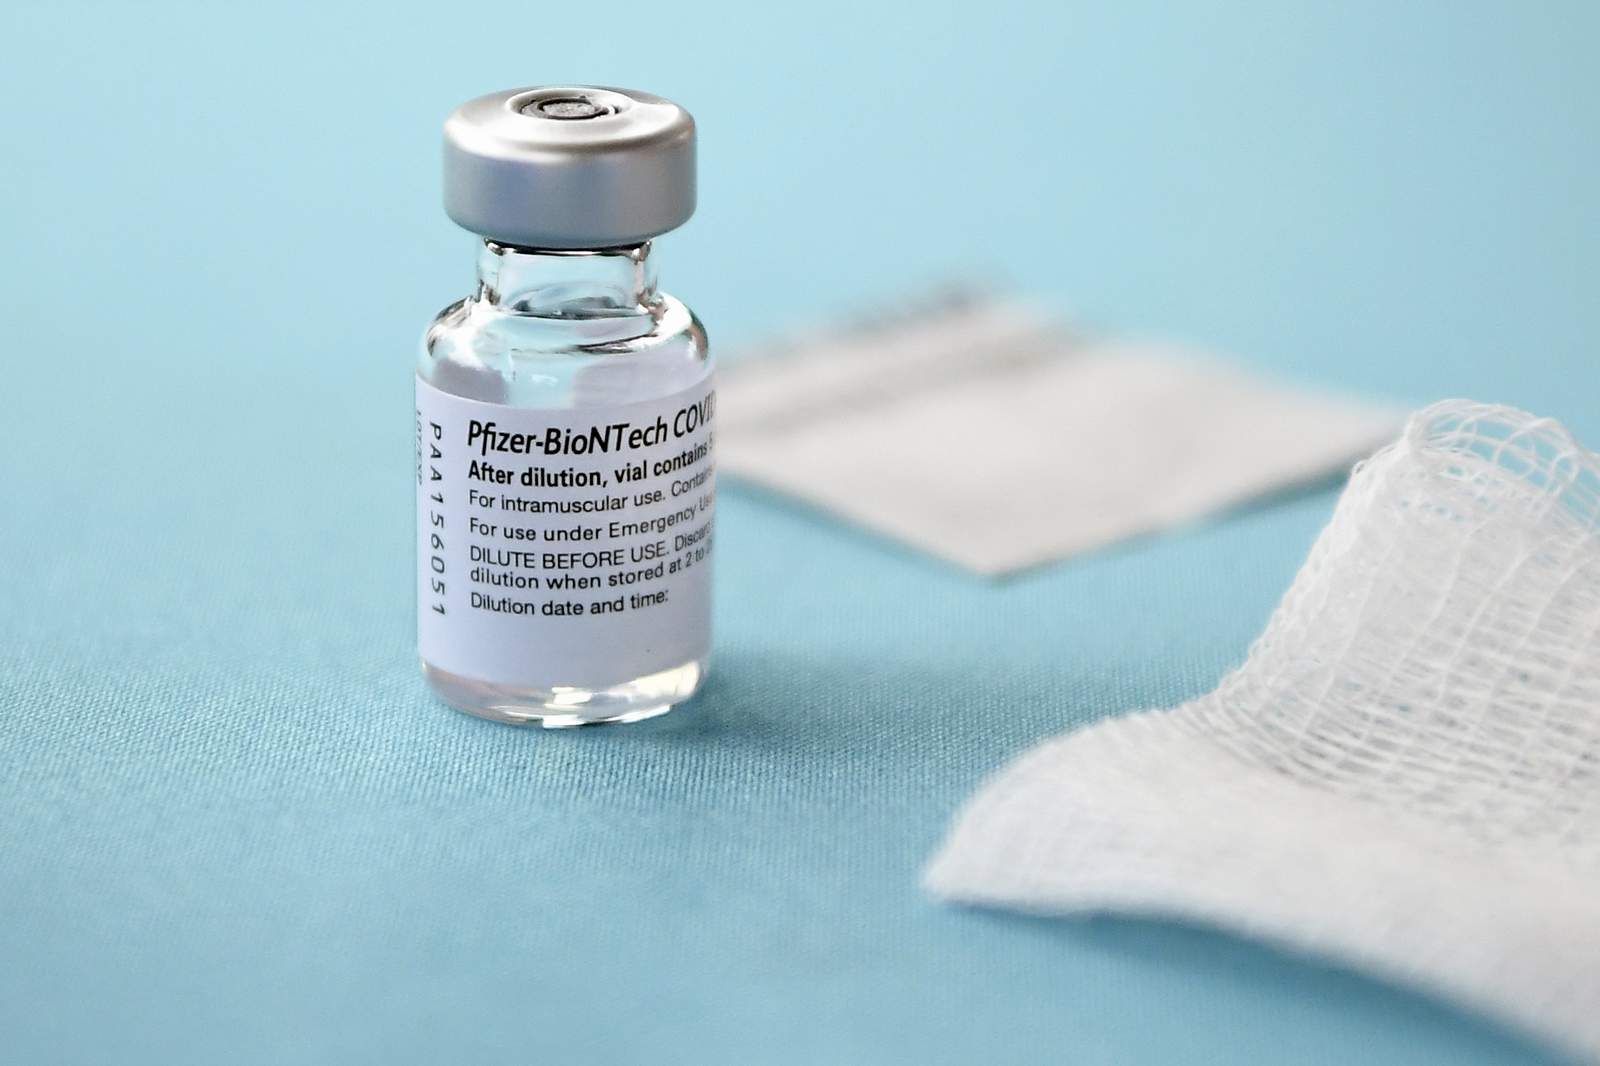 Coroner reviewing Florida doctor’s death 2 weeks after vaccine